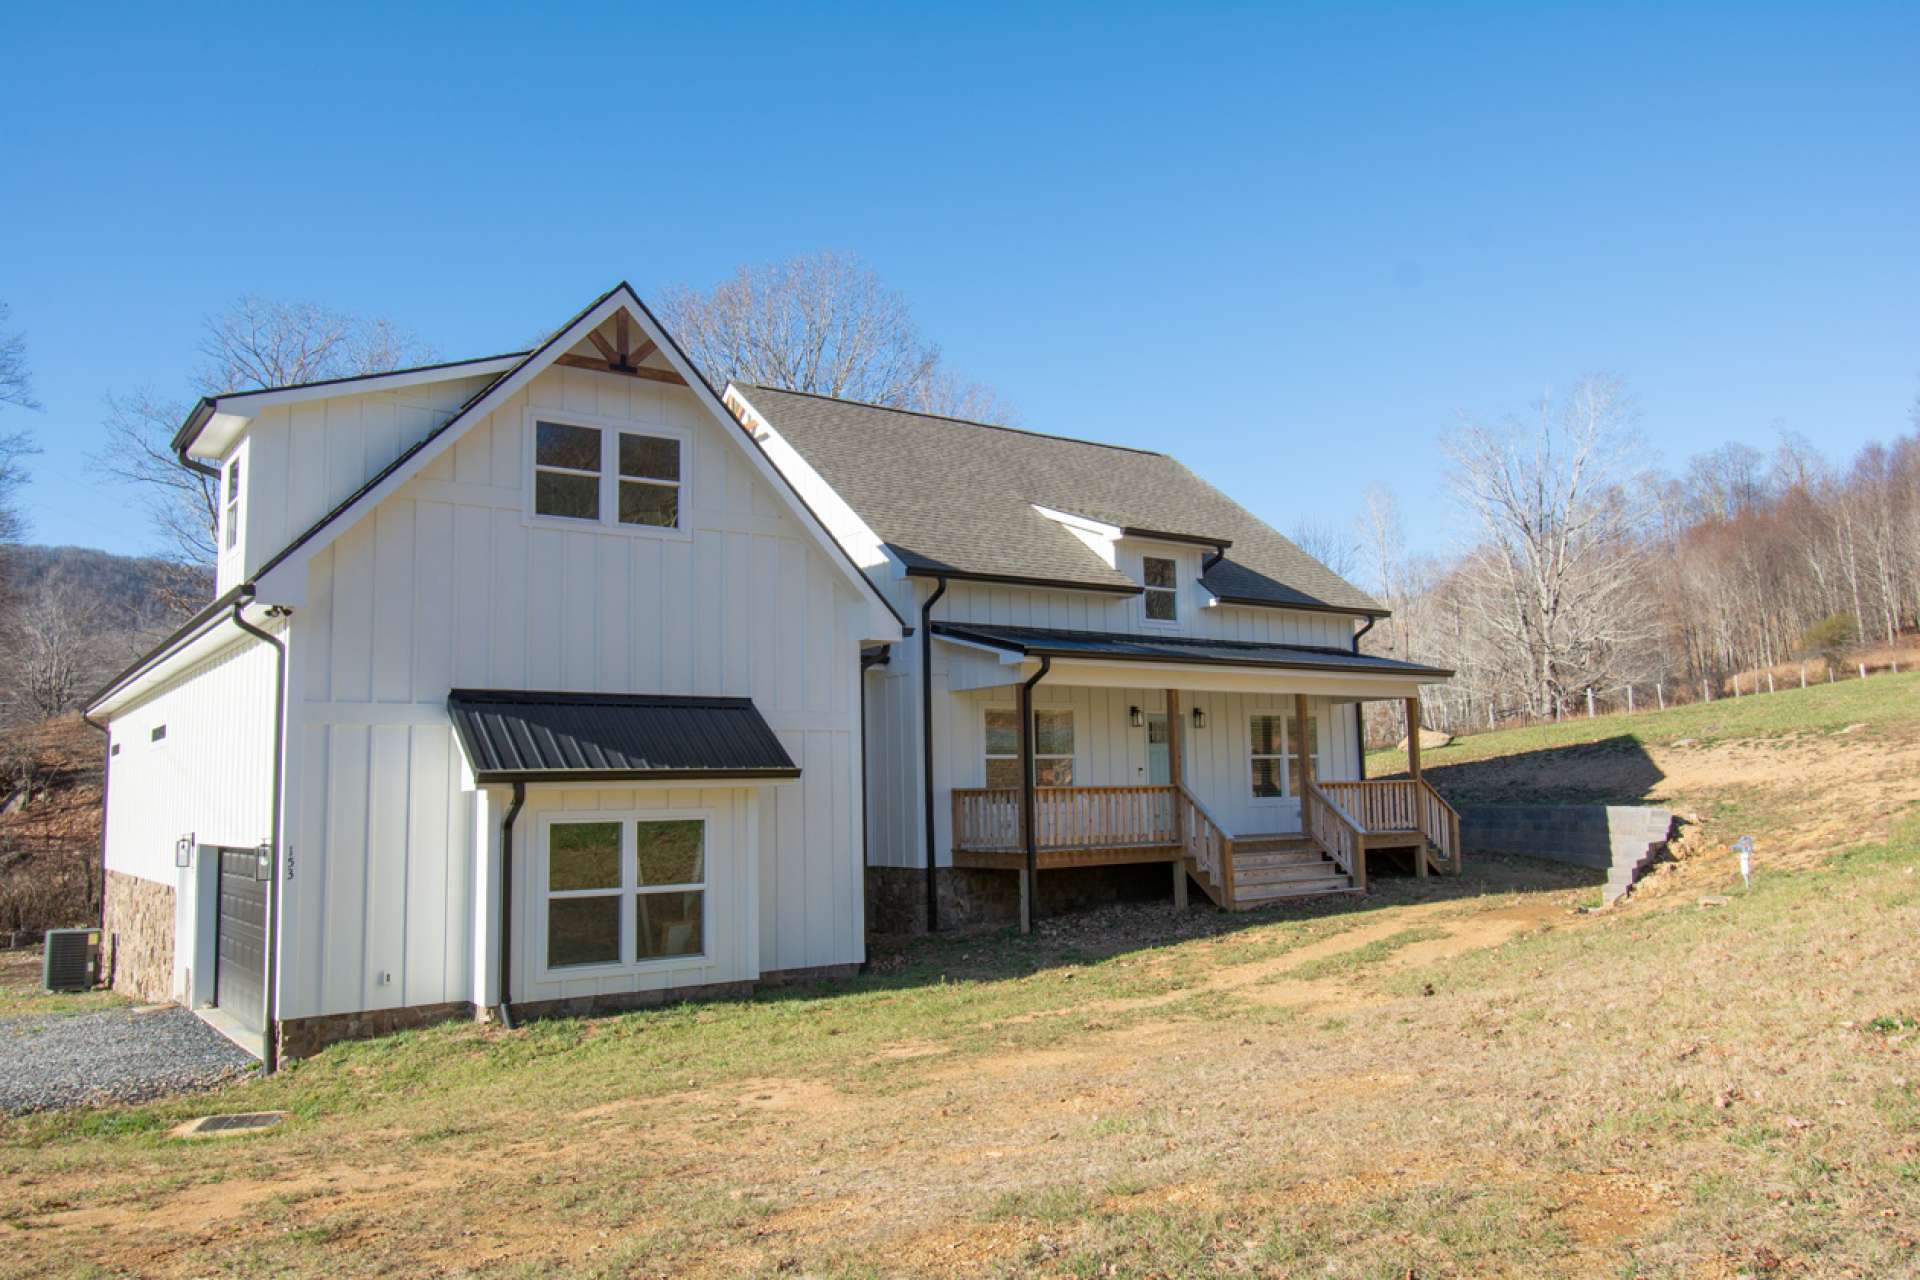 Welcome to your Southern Ashe County Craftsman home.